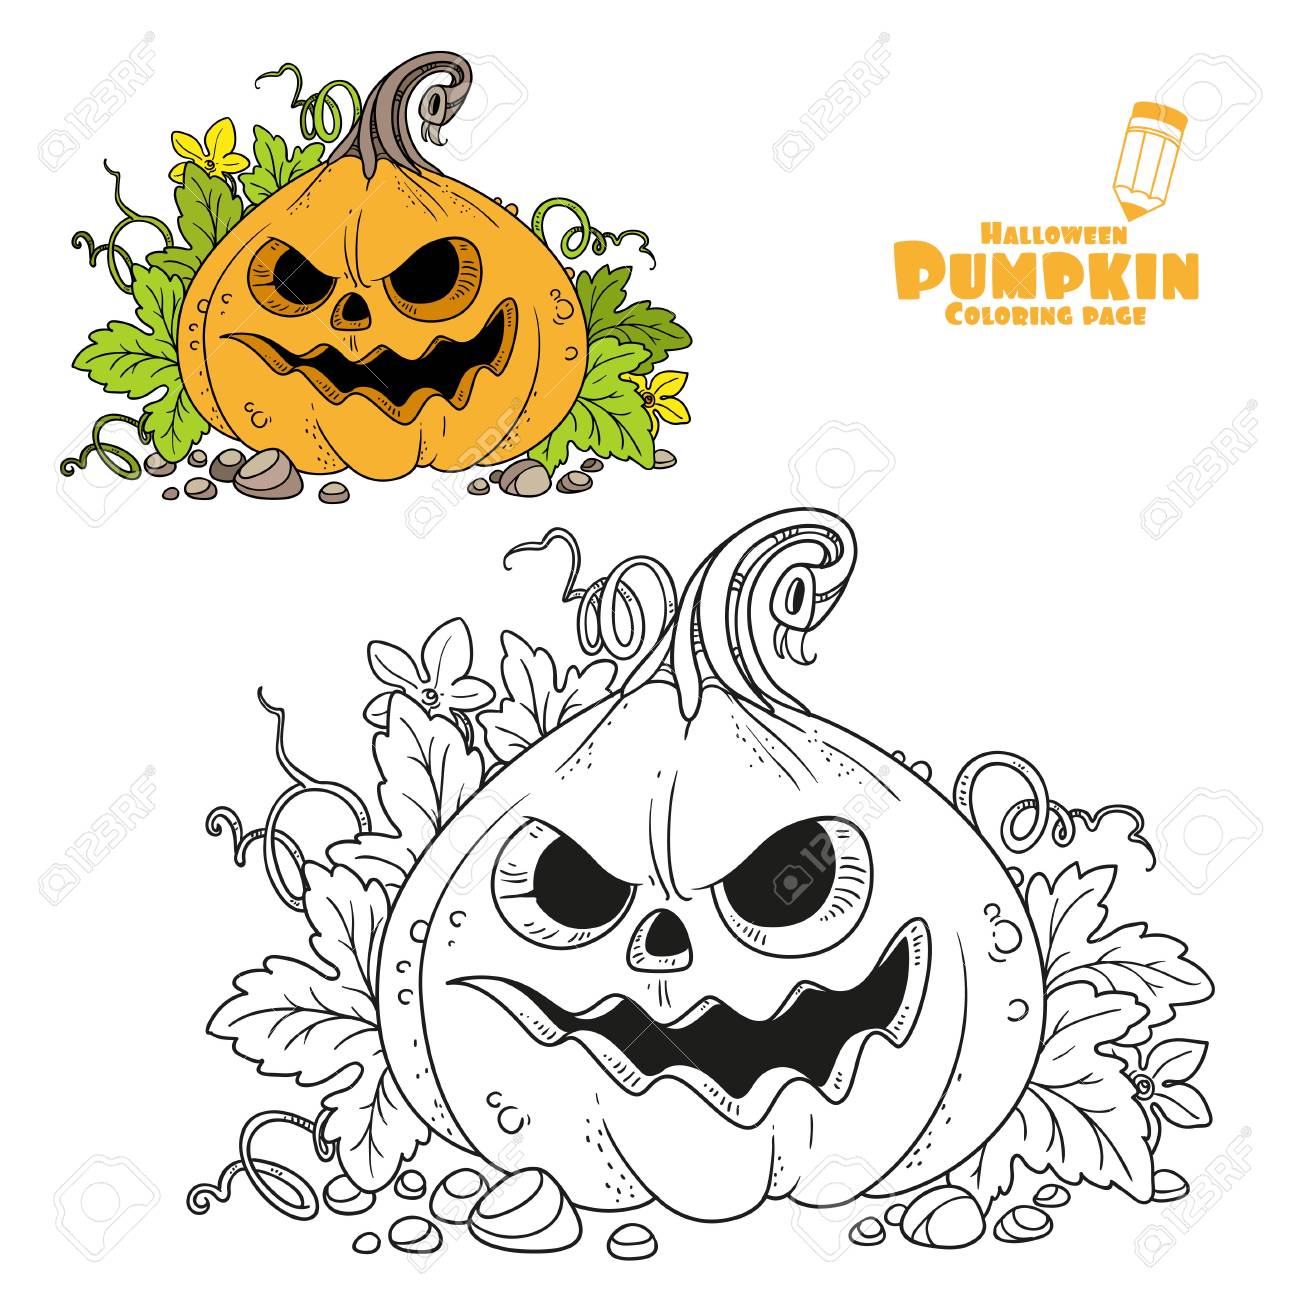 Lantern from pumpkin with the cut out of a grin and leaves color and outlined for coloring page royalty free svg cliparts vectors and stock illustration image